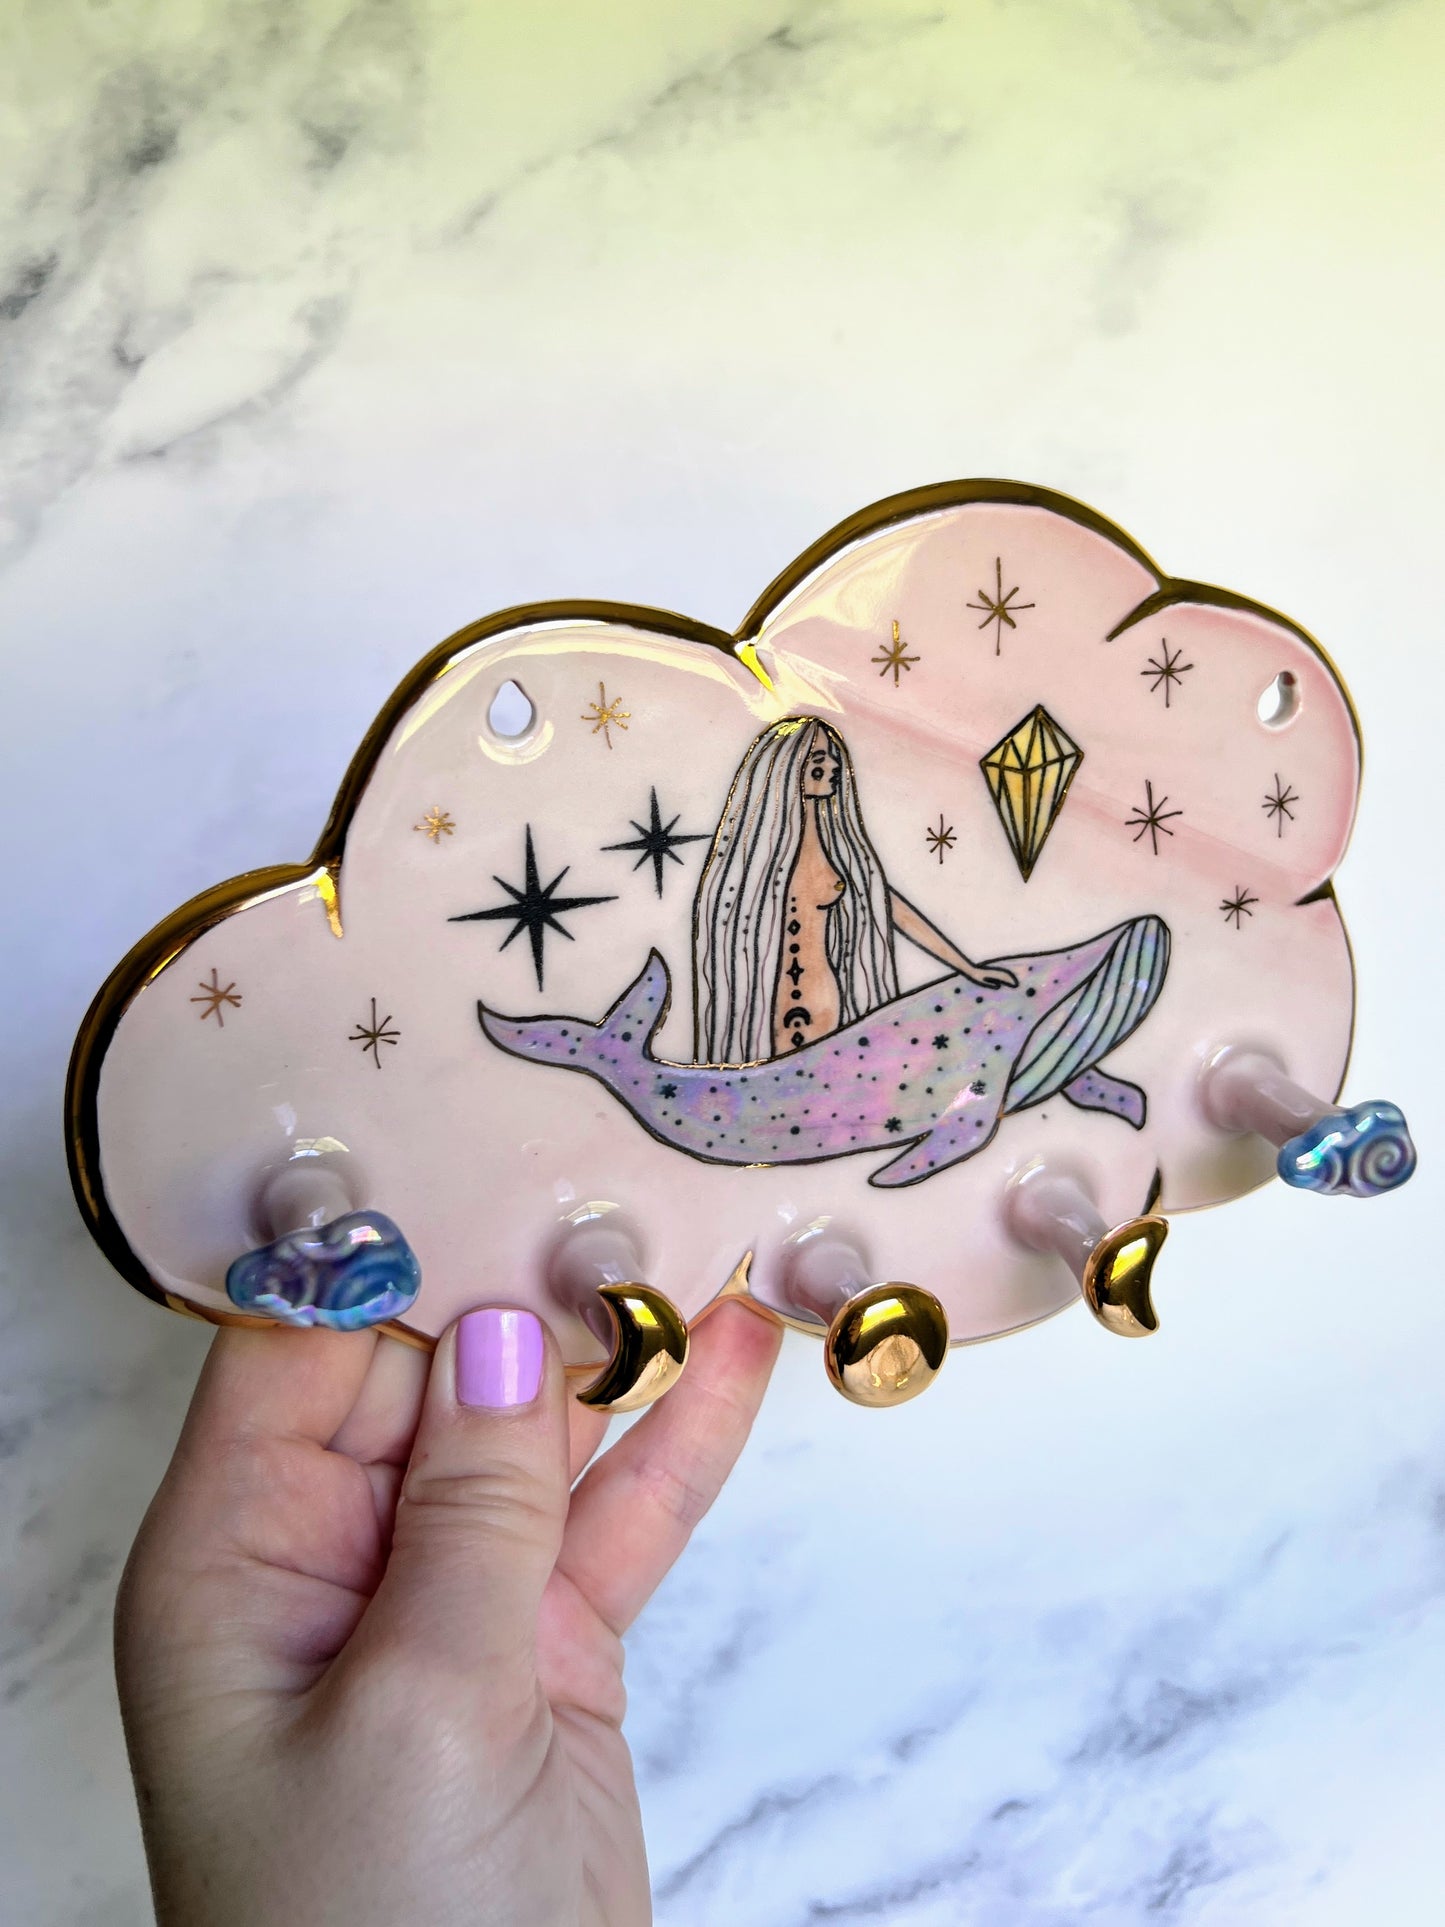 Dreamy Cloud Jewelry Wall Hanging Whale Goddess Moon Phase Witchy Necklace Display